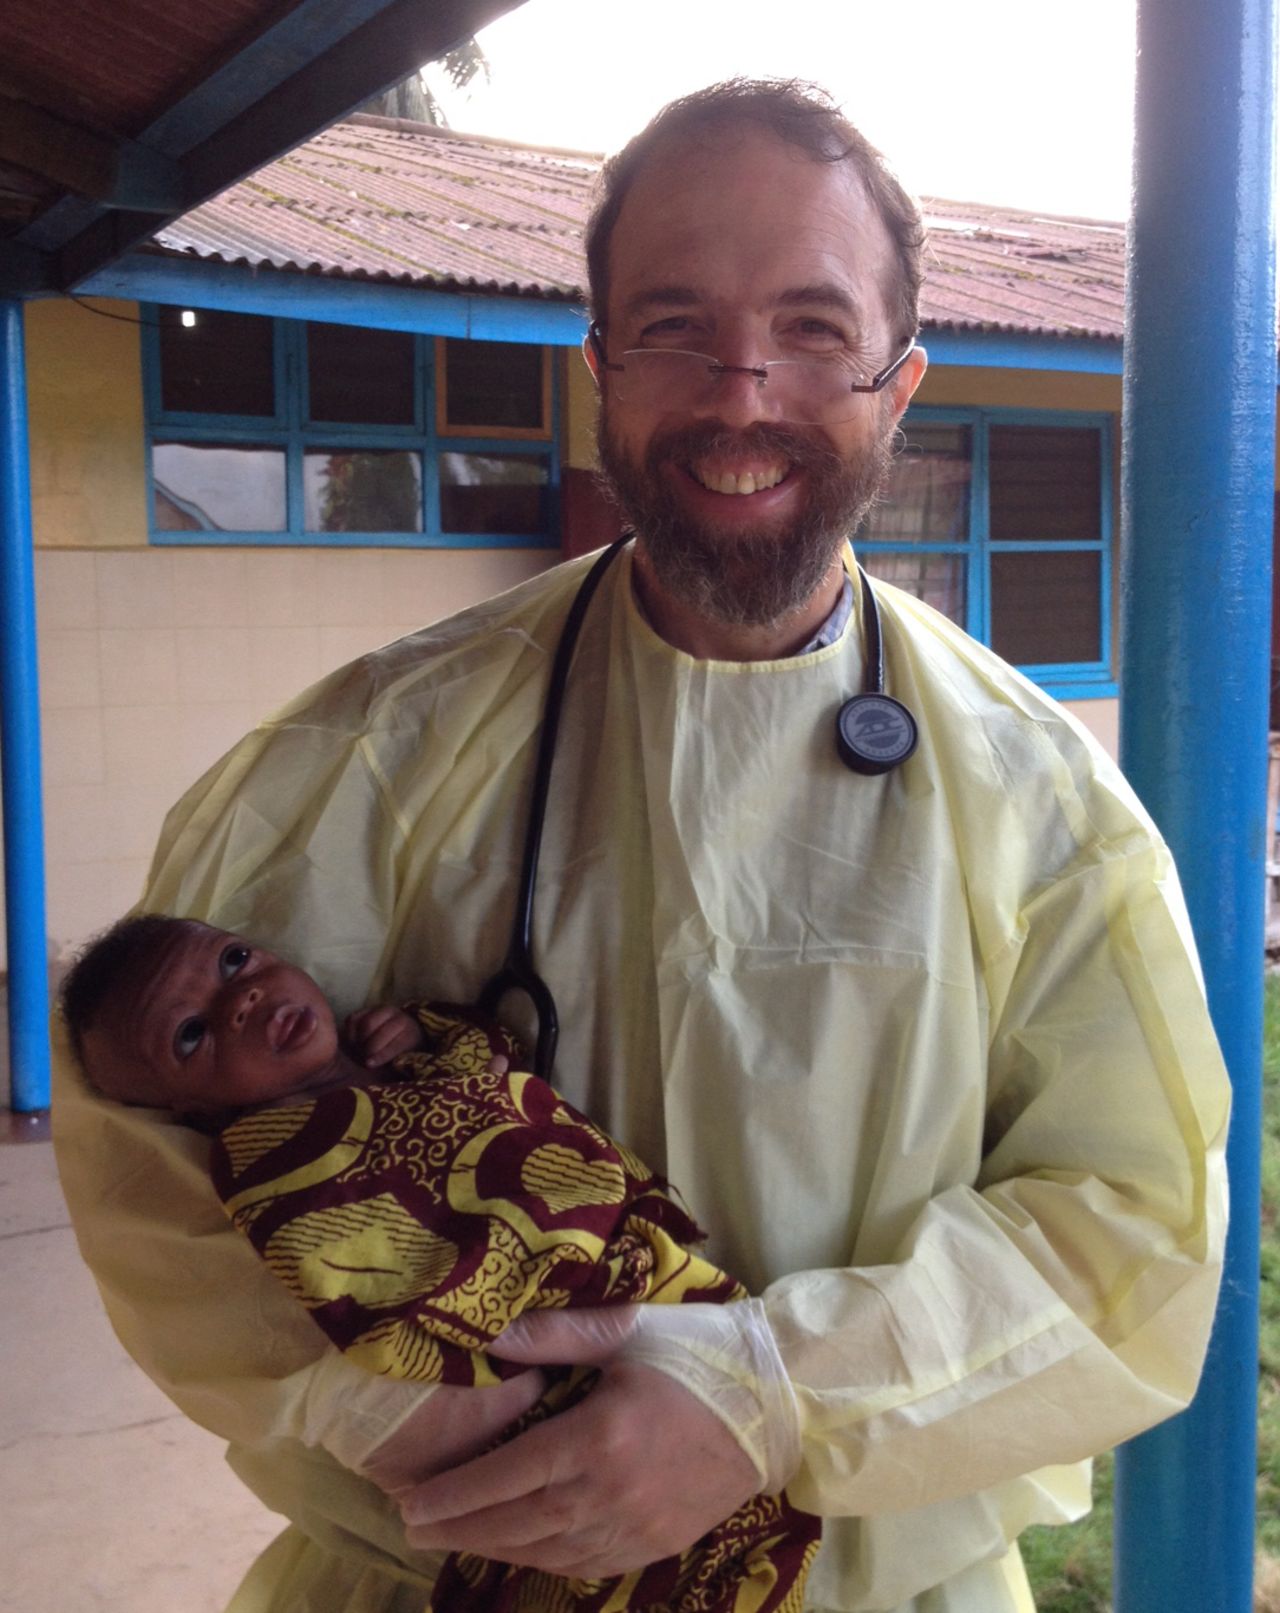 Sacra holds a baby named Noah on the morning of his discharge. For the future, "for the sake of the courageous doctors, nurses, lab technicians and aides who continue to face the same risk I faced, the global community needs to press forward with the task of improving protocols for preventing Ebola in hospitals, clinics and communities," Sacra said. "We need to press on with generous funding for Ebola vaccine and treatment trials so that some good science backed up by data can inform our actions. We should be doing our best to enroll every health worker in Sierra Leone, Guinea and Liberia in a vaccine trial. And even when we get to zero cases of Ebola, we need to turn our attention to training thousands of doctors and nurses to form a stronger health-care work force for these nations, so they will be ready to quickly contain the next outbreak of Ebola or other highly infectious disease." That, he argues, is essential. "If we think about it, we'll realize that we can't afford to do otherwise."